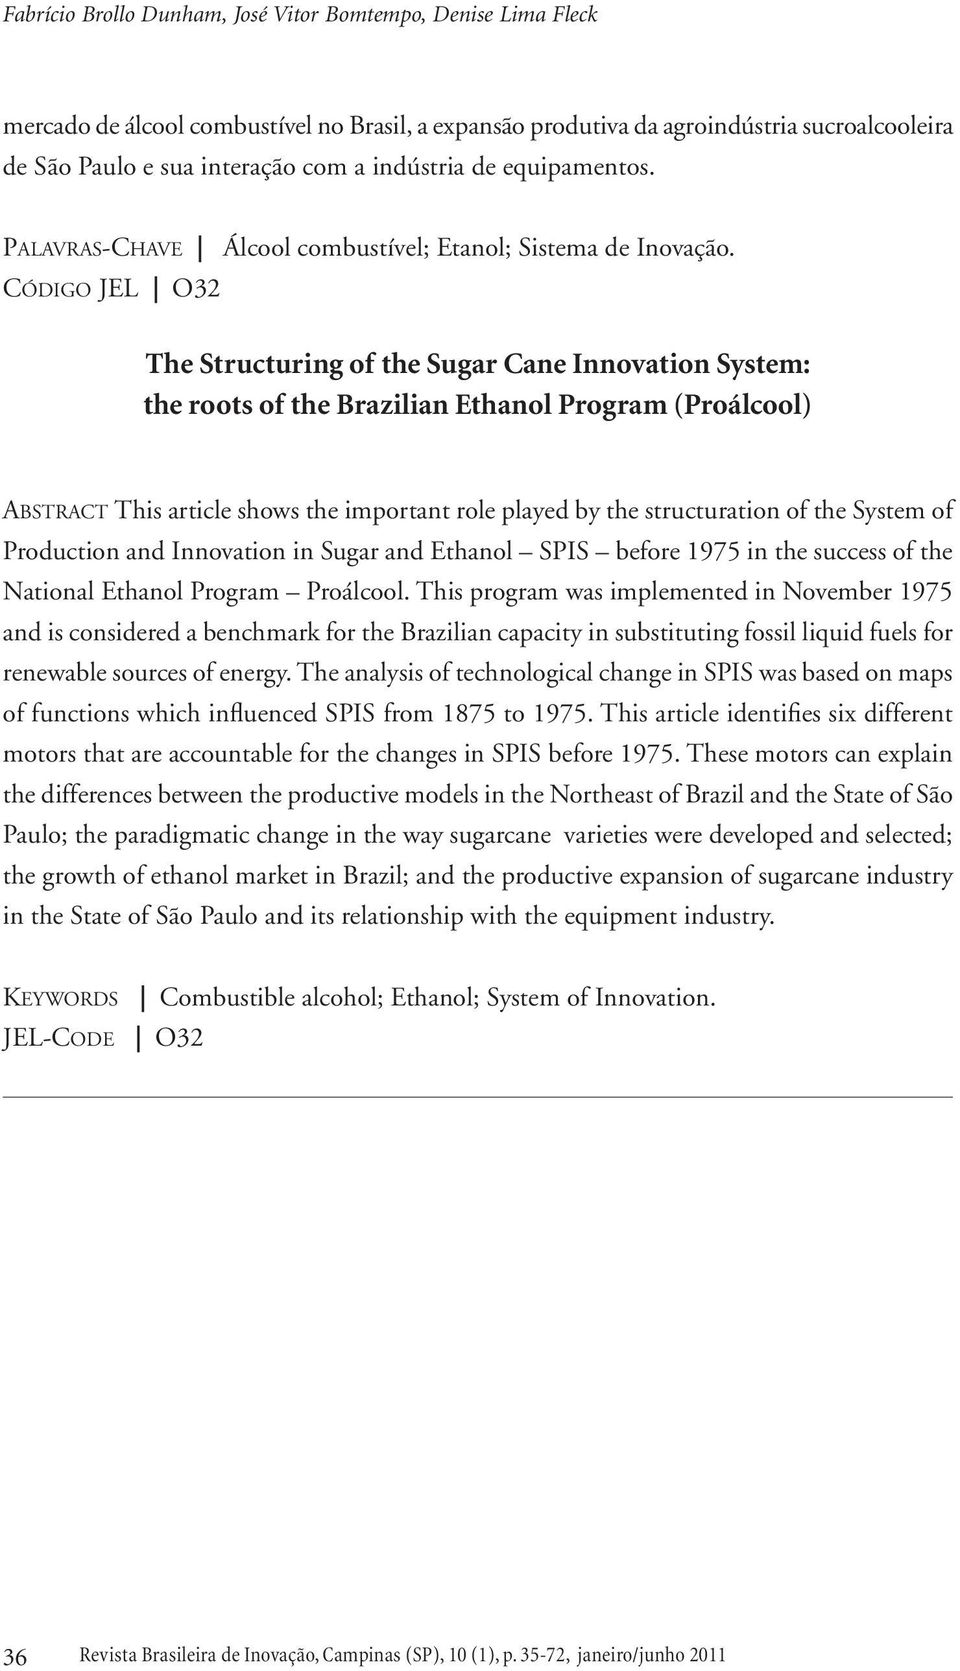 Código JEL O32 The Structuring of the Sugar Cane Innovation System: the roots of the Brazilian Ethanol Program (Proálcool) Abstract This article shows the important role played by the structuration